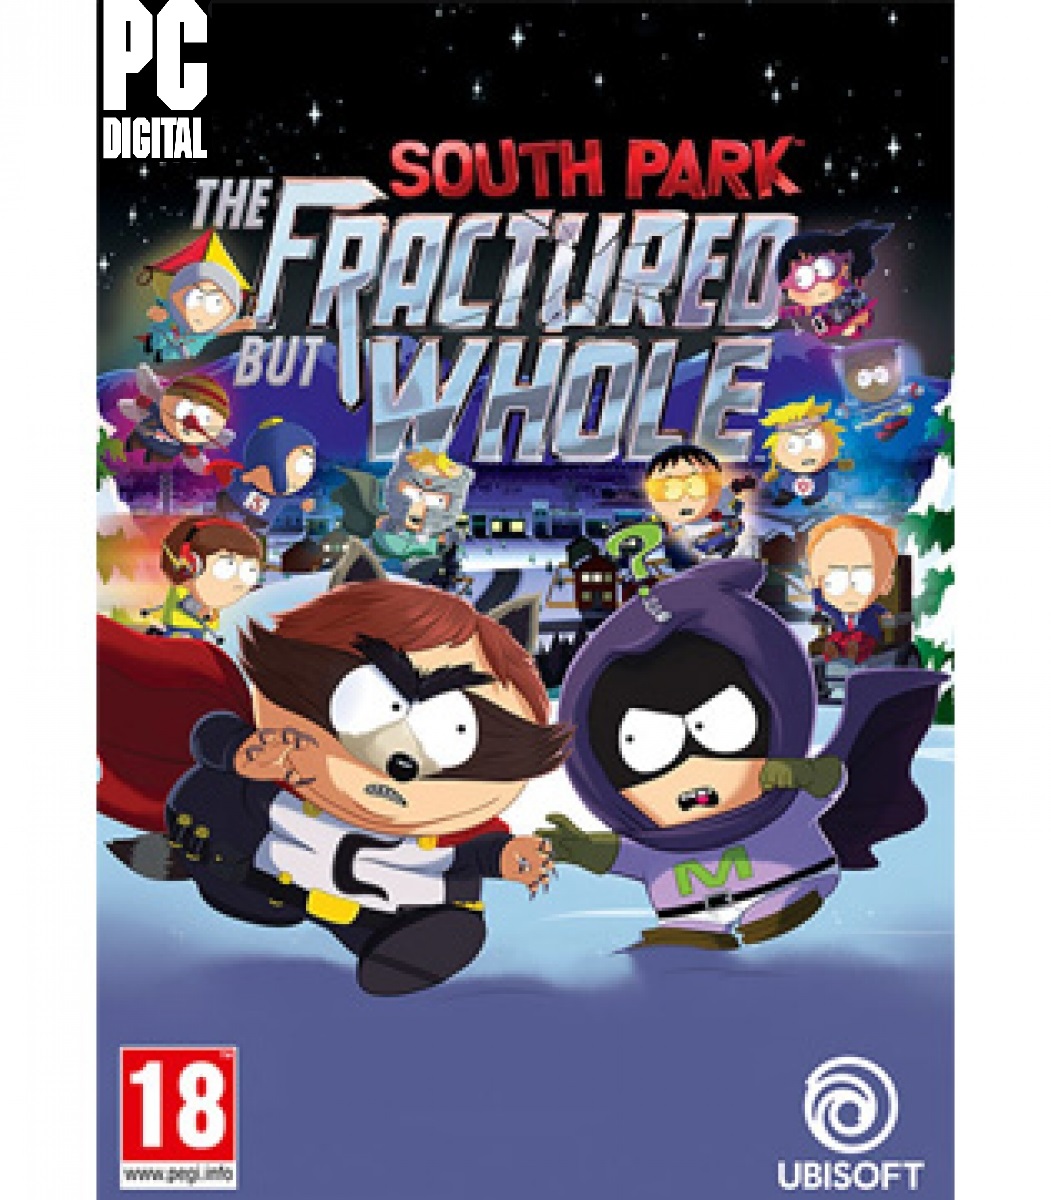 South Park: The Fractured But Whole PC (Digital)